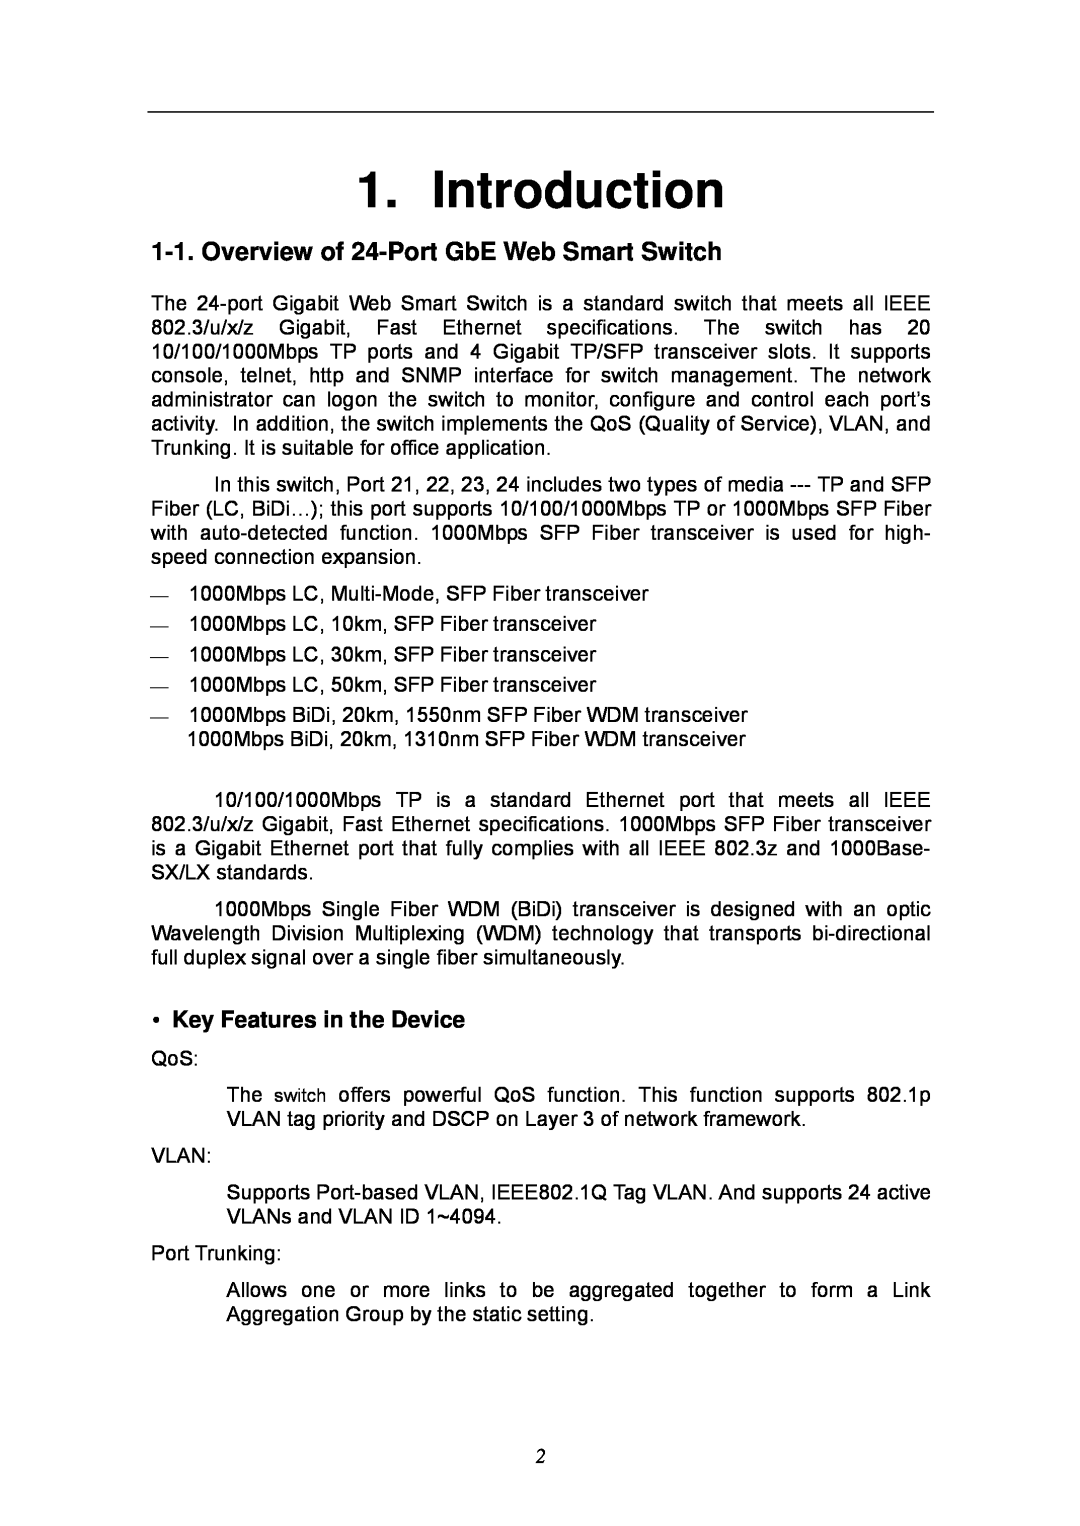 KTI Networks KGS-2404 manual Introduction, Overview of 24-Port GbE Web Smart Switch, Key Features in the Device 